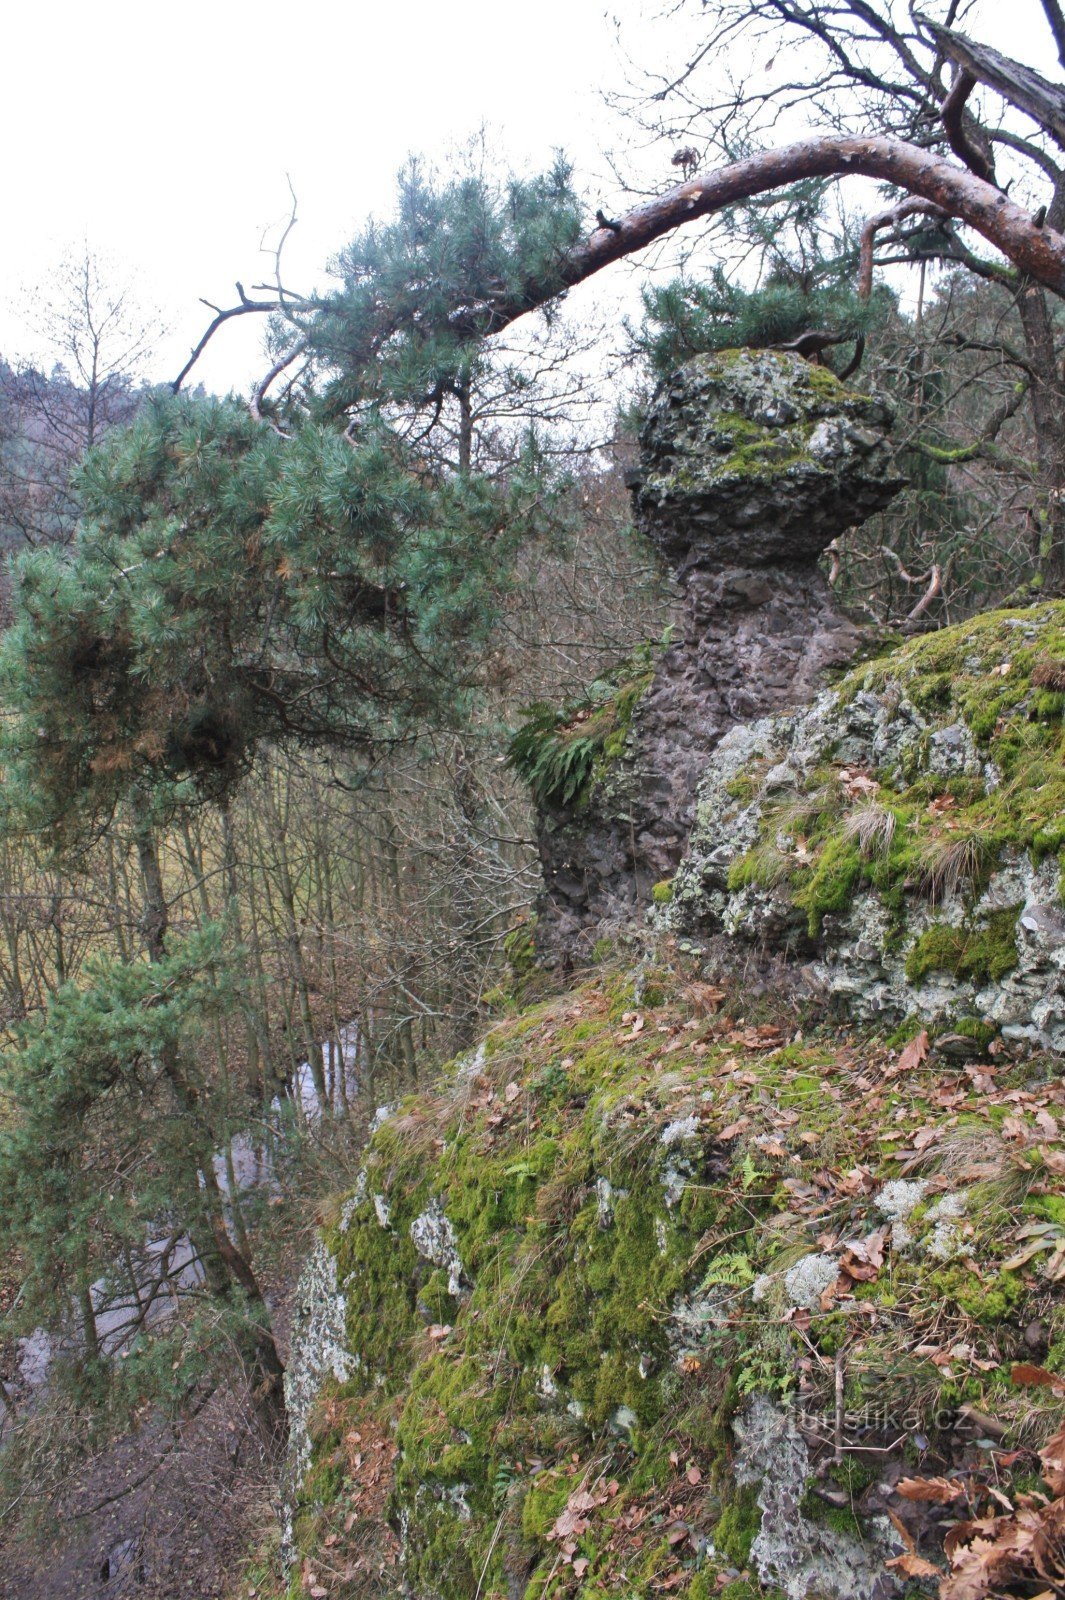 Krkatá baba is located on top of the rocks above the Lubě stream